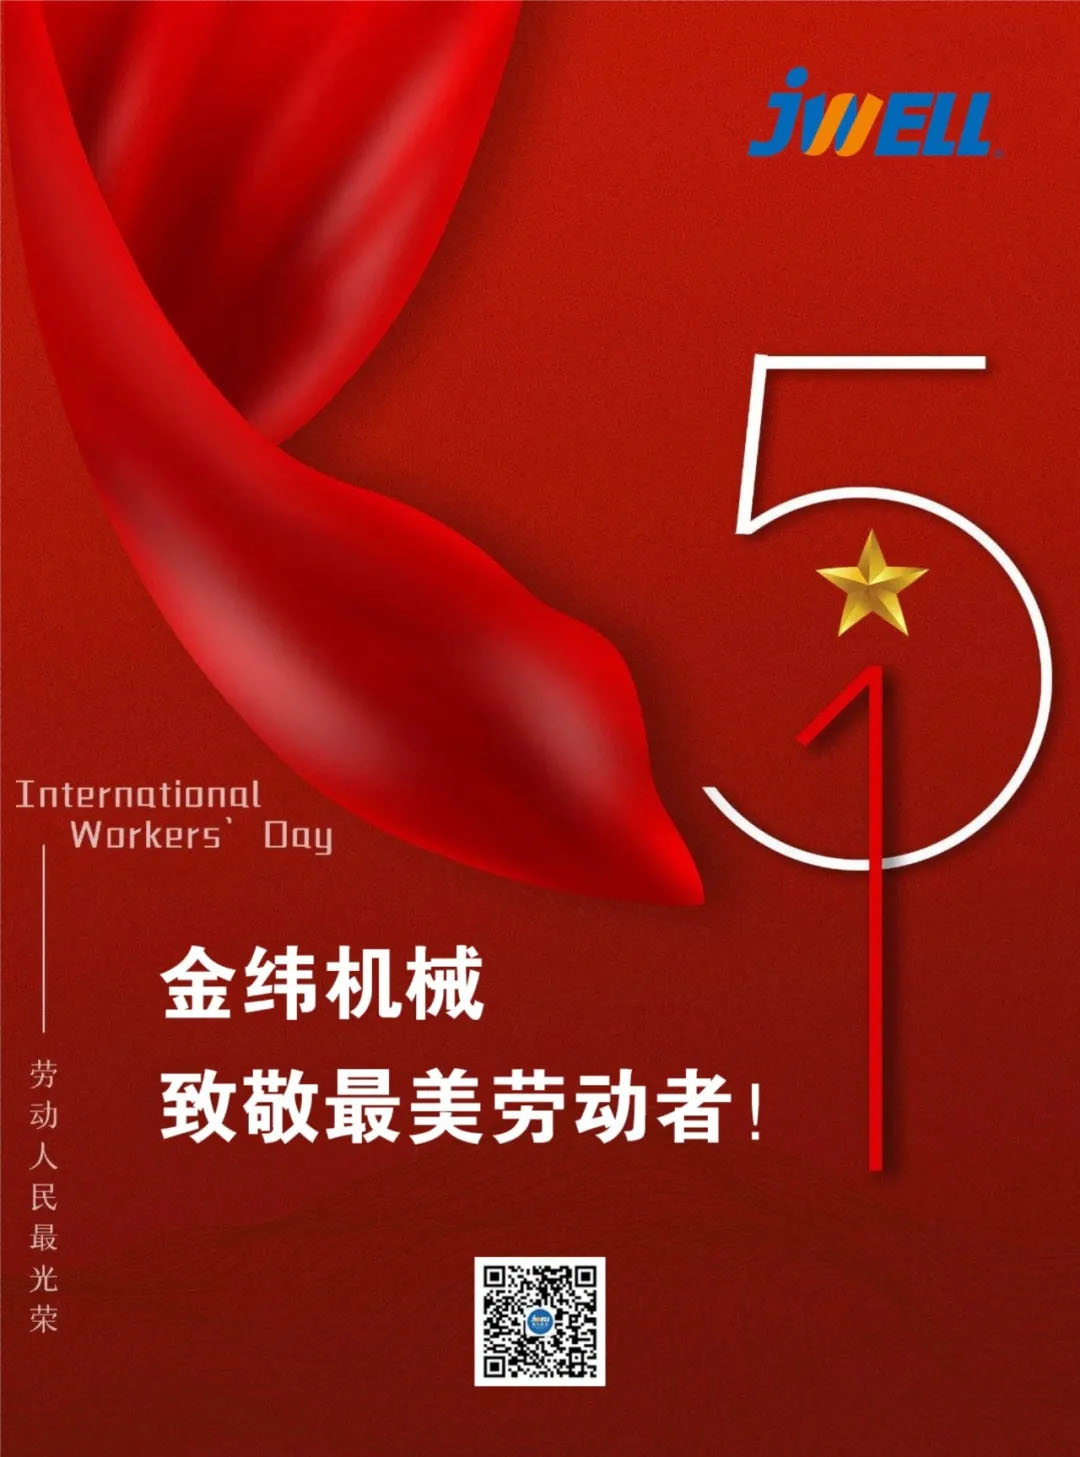 Happy International Workers Day2